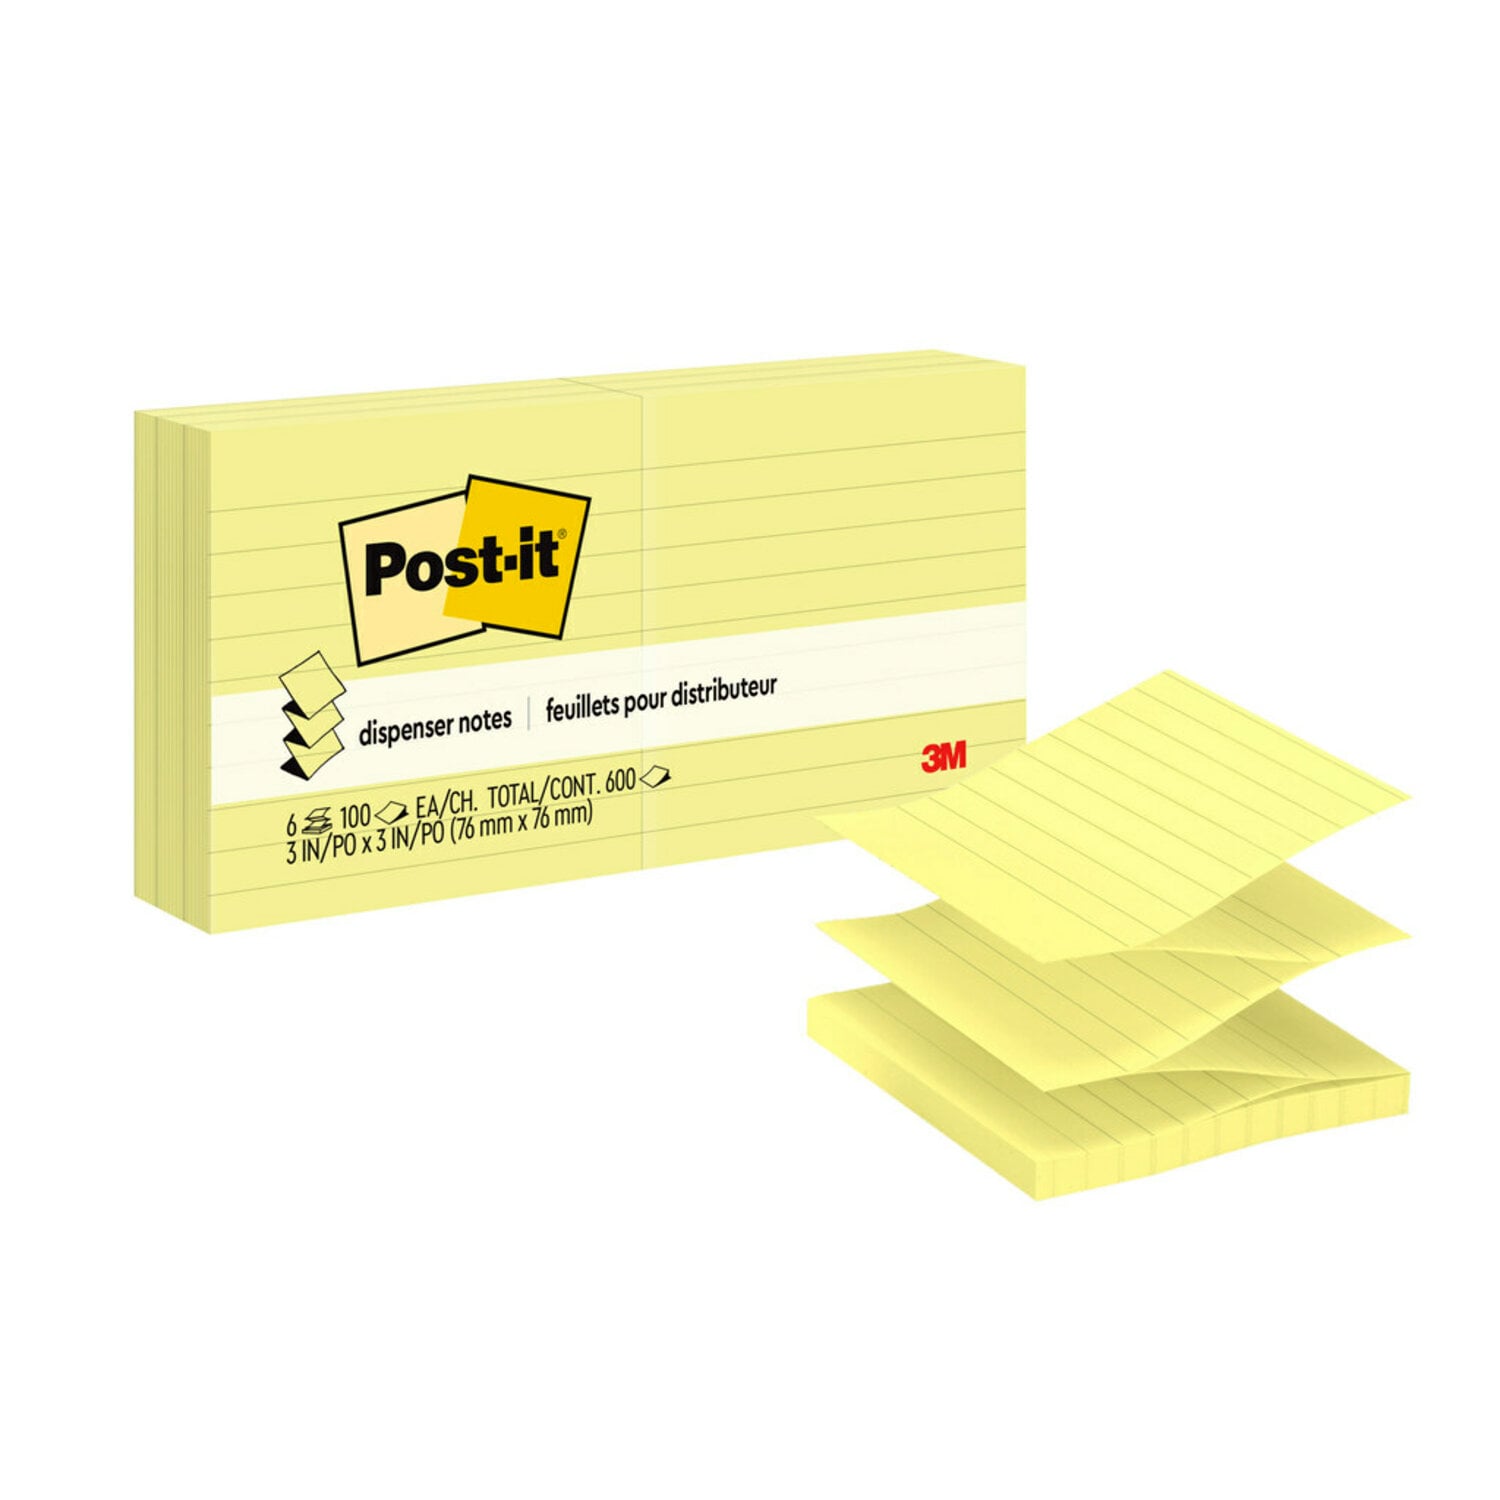 7100098629 - Post-it Dispenser Pop-up Notes R335, 3 in x 3 in